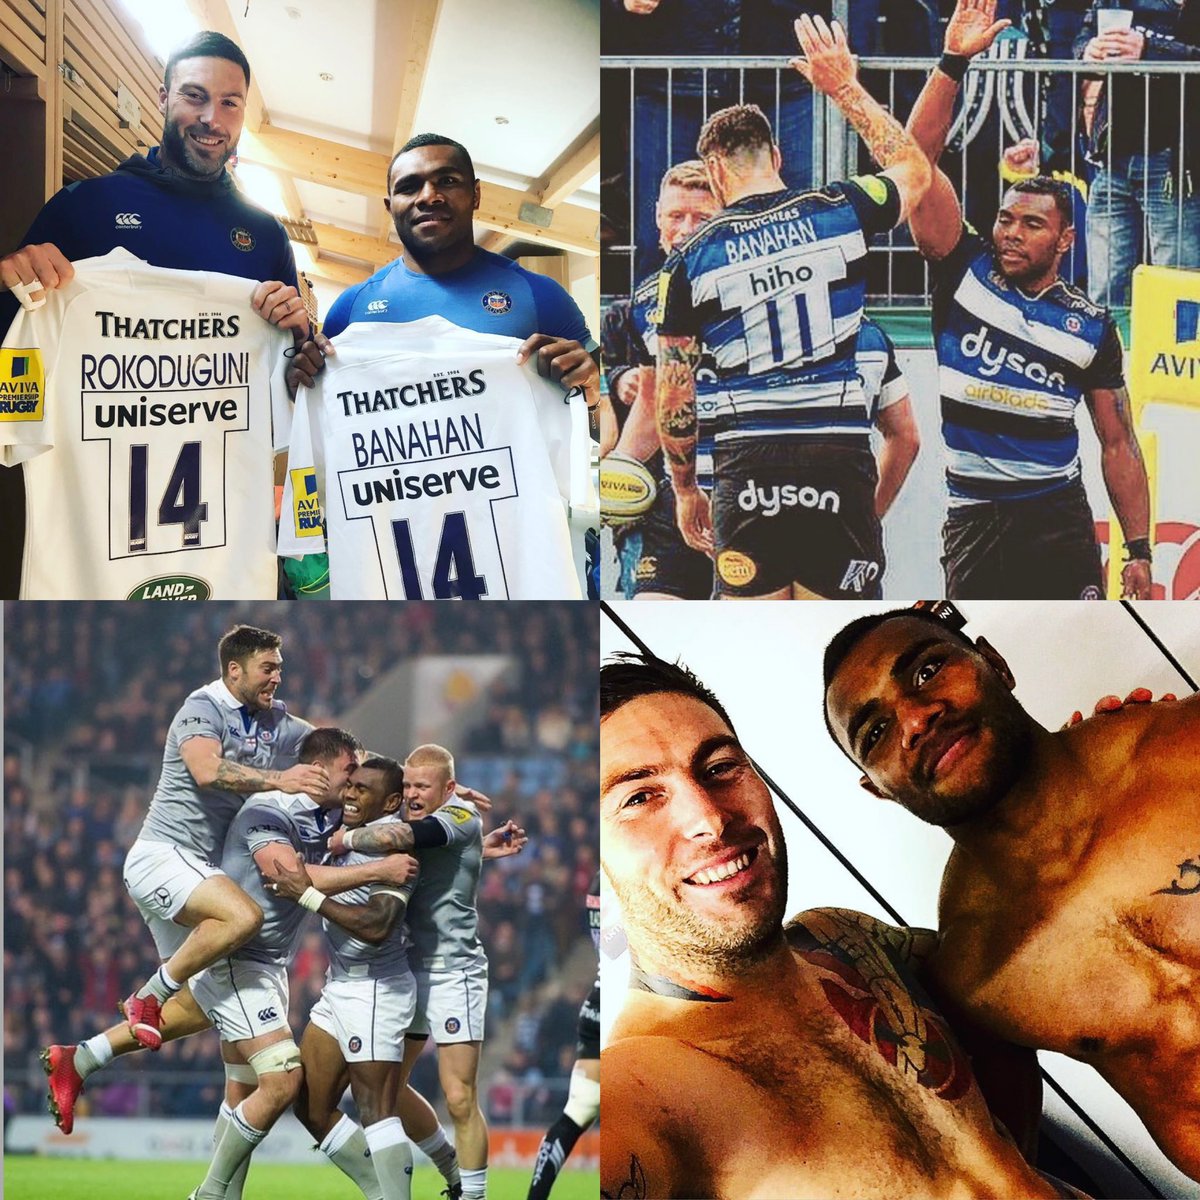 Sad to see another one go 😢 so many great memories with this man @rocco3225 #highfive @BathRugby